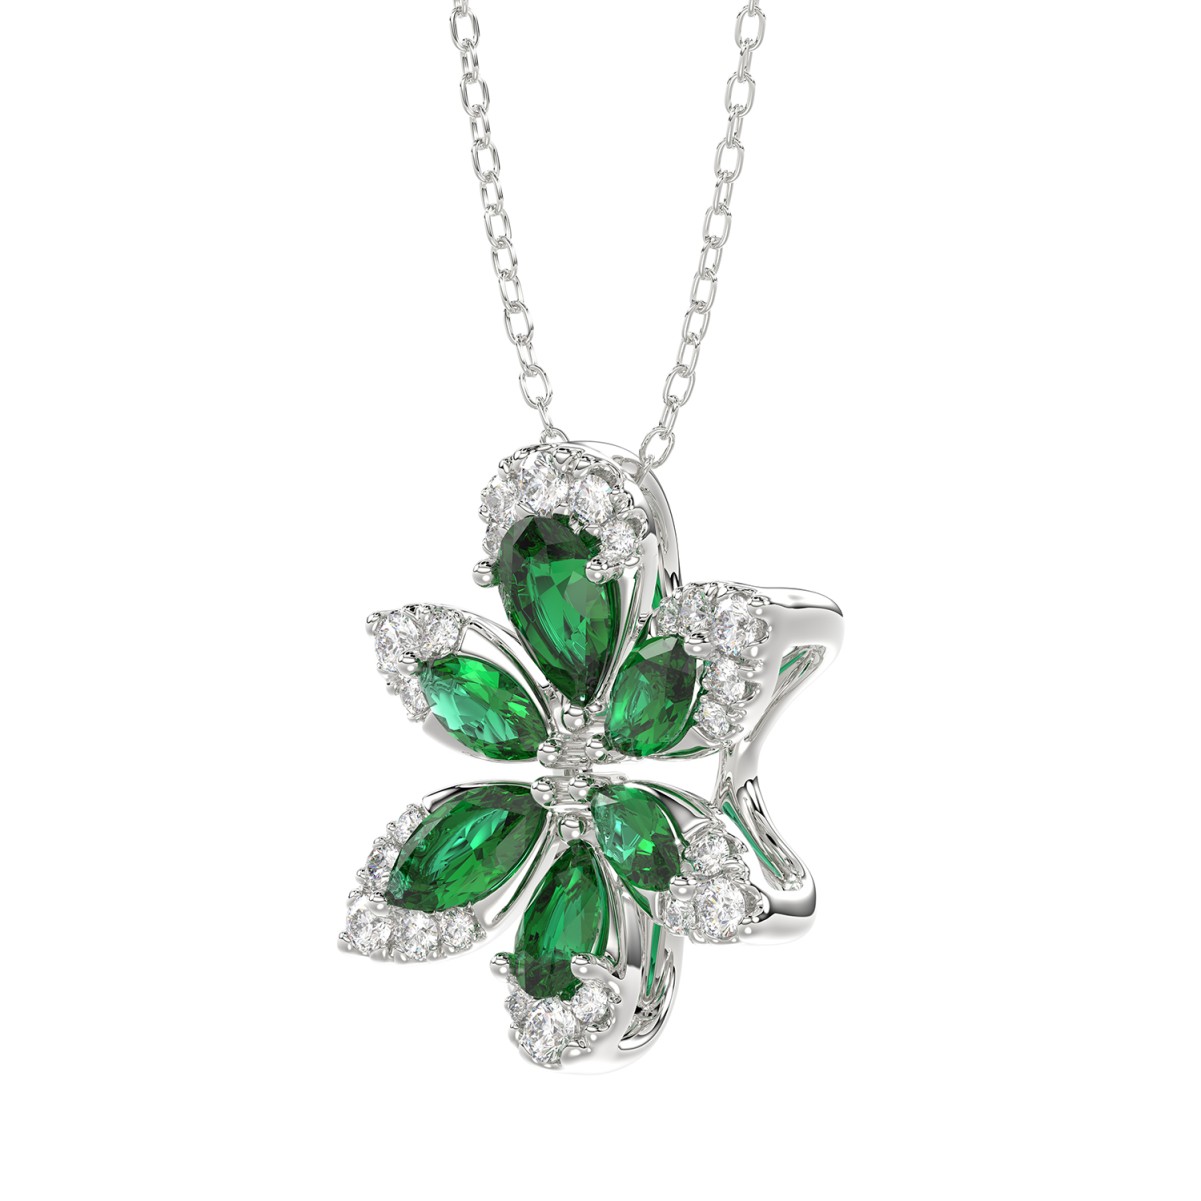 14K WHITE GOLD 1 1/3CT ROUND/PEAR/MARQUISE DIAMOND LADIES PENDANT WITH CHAIN(COLOR STONE PEAR GREEN EMERALD/MARQUISE DIAMOND 1/6CT)